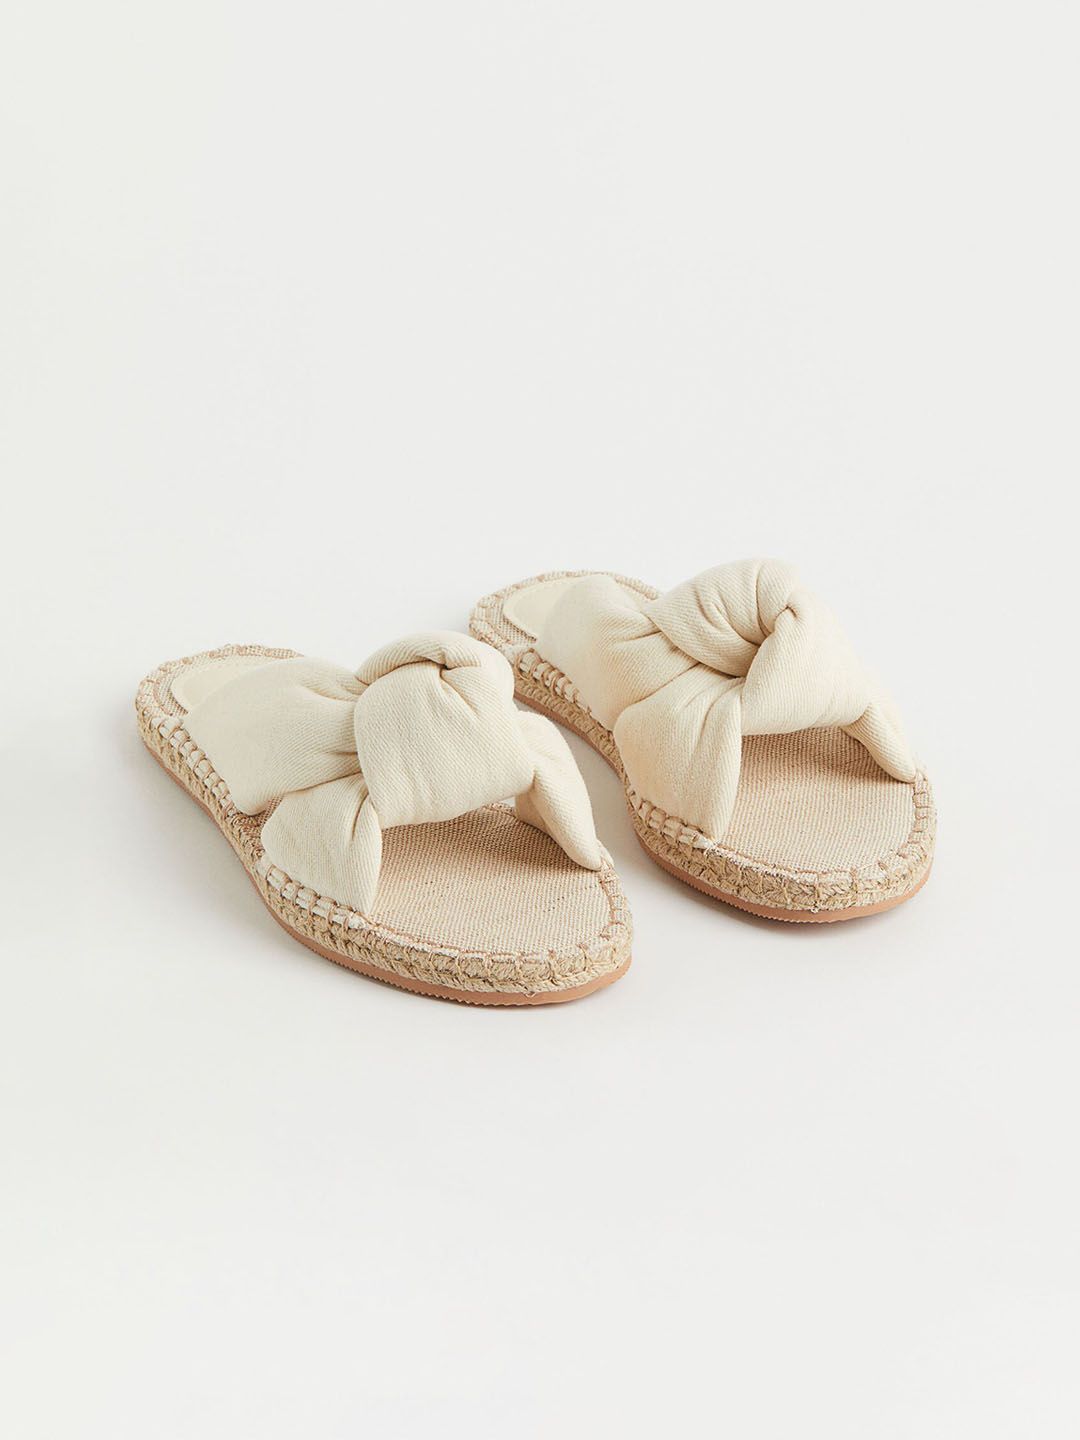 H&M Women White Knot-detail Sandals Price in India